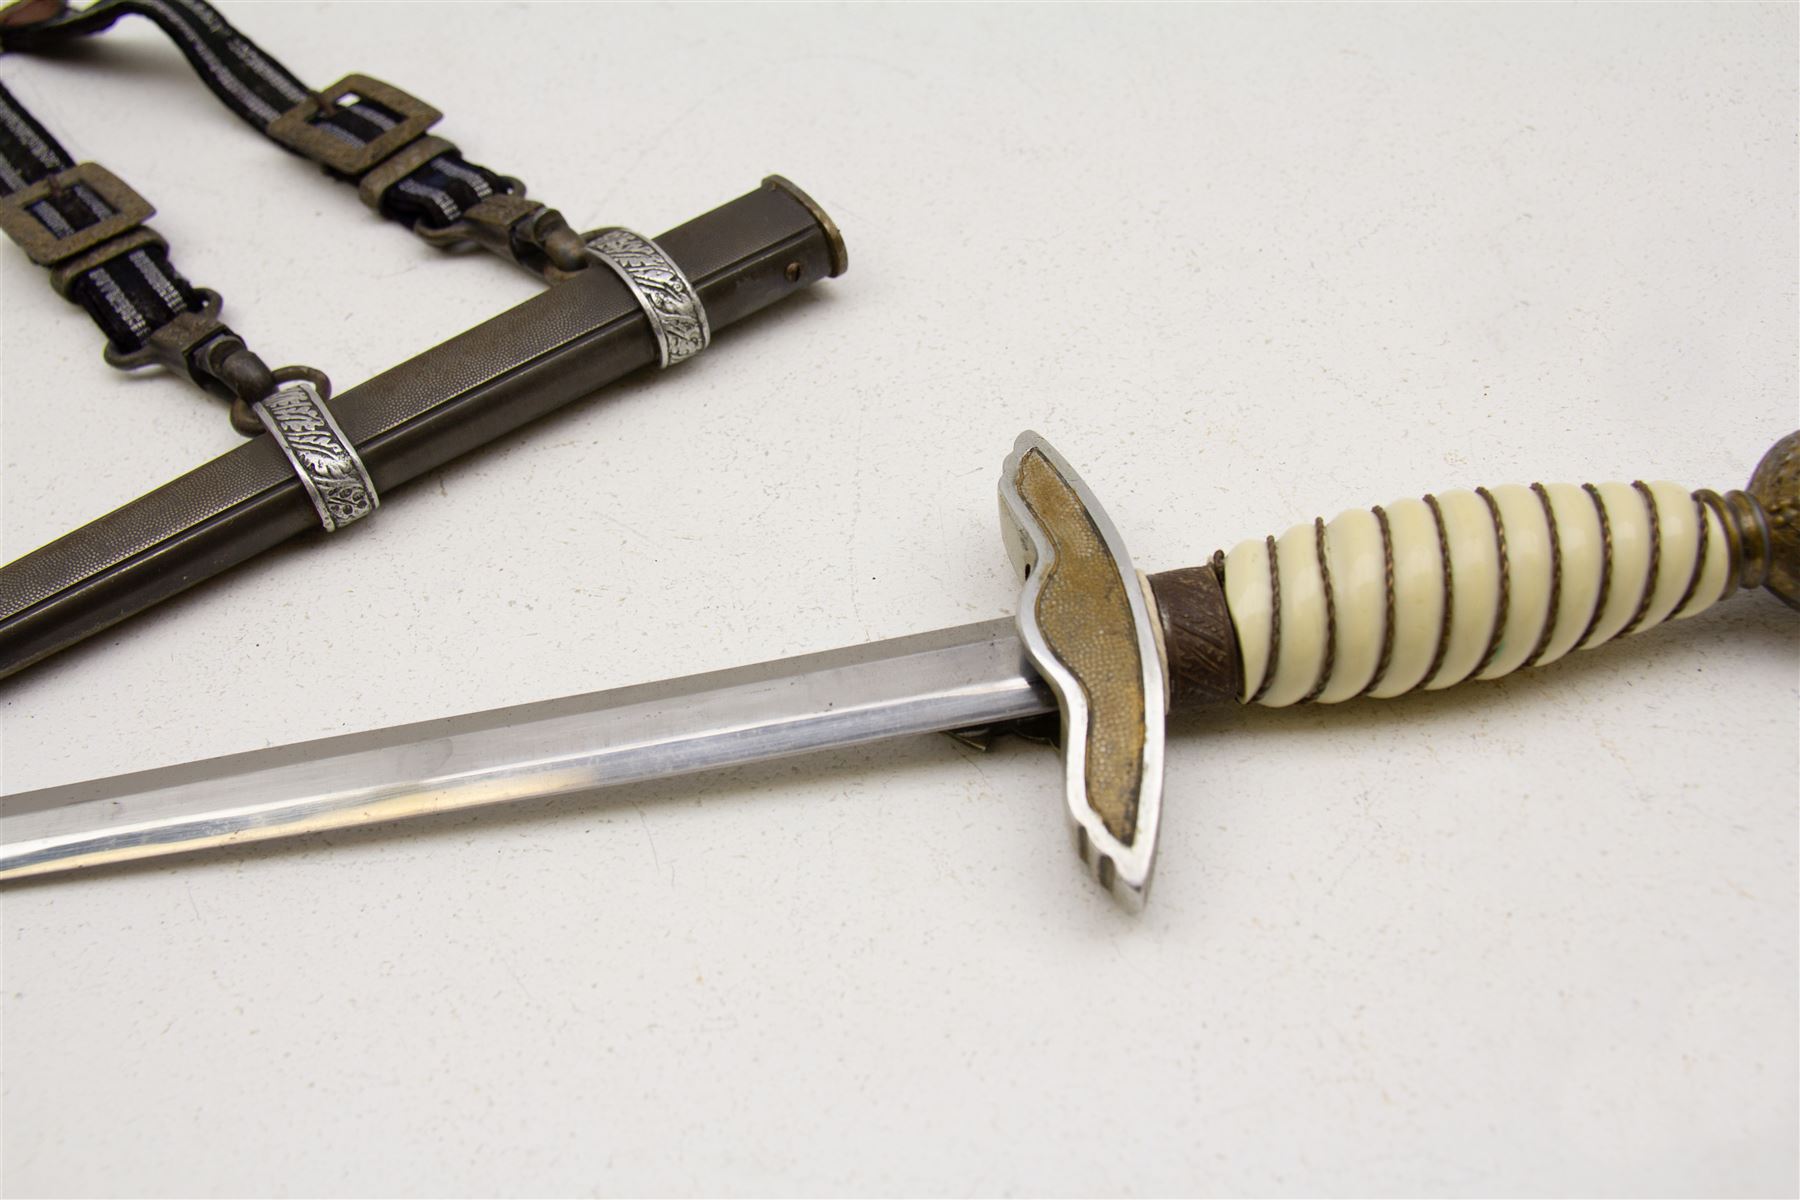 WWII German Luftwaffe officers navel dress dagger with white celluloid grip having wire binding - Image 5 of 5